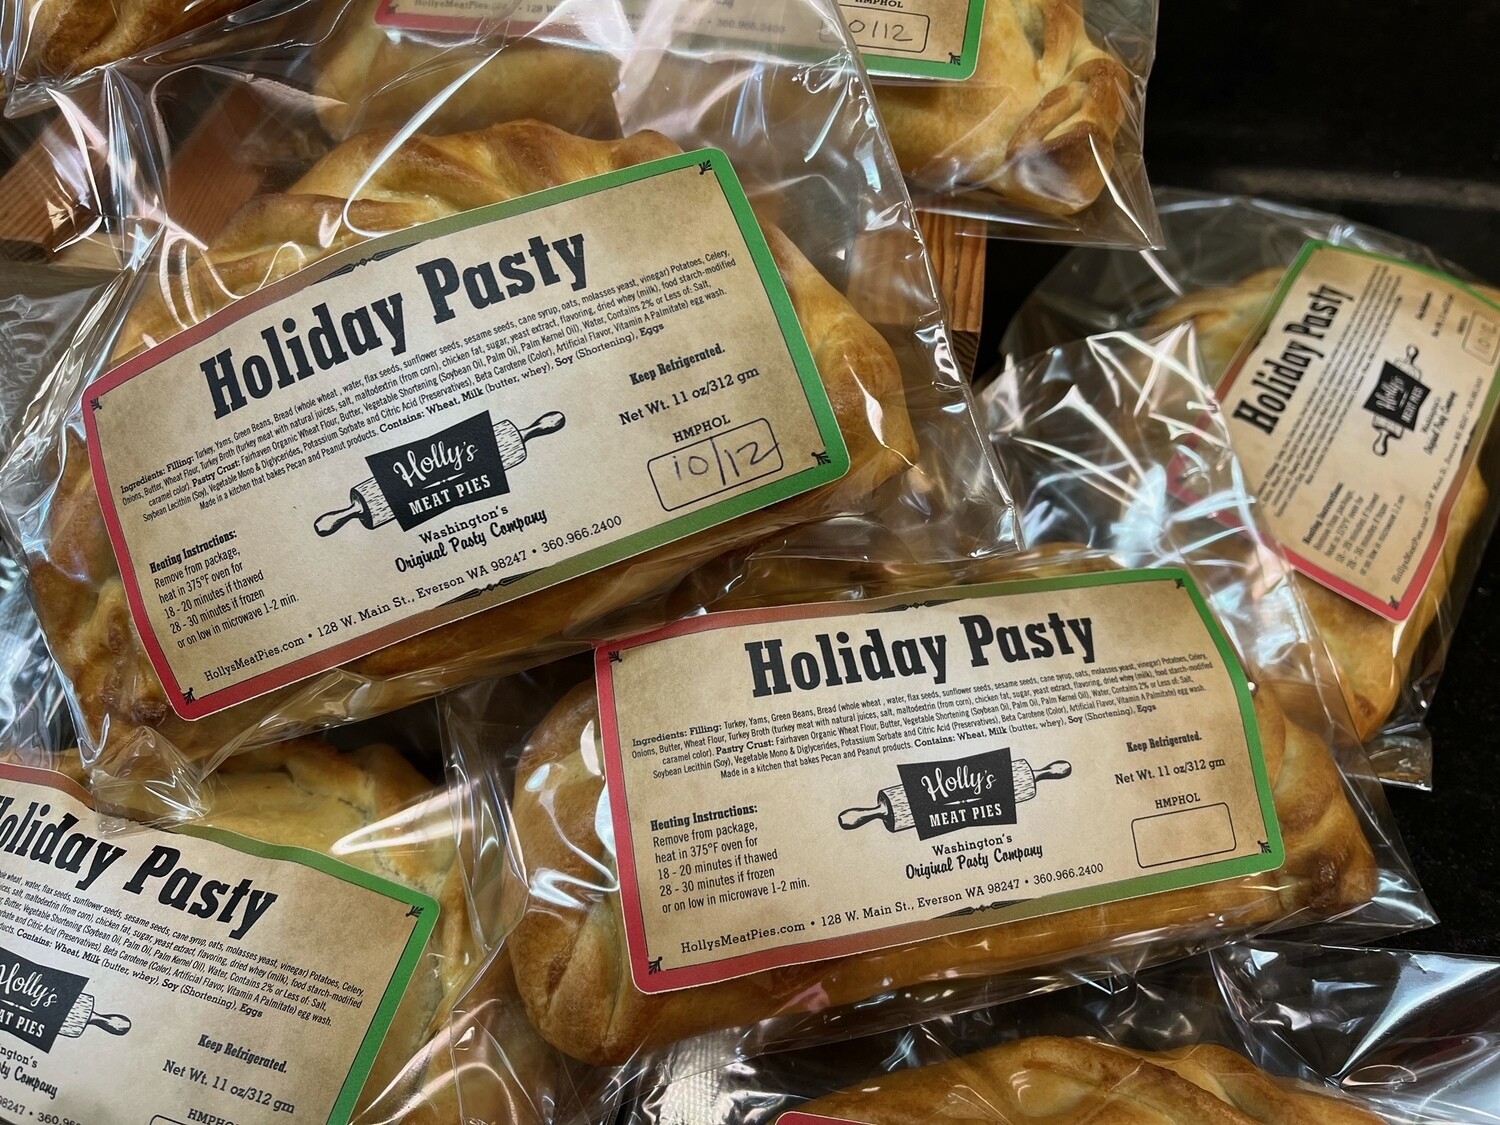 HOLIDAY PASTY